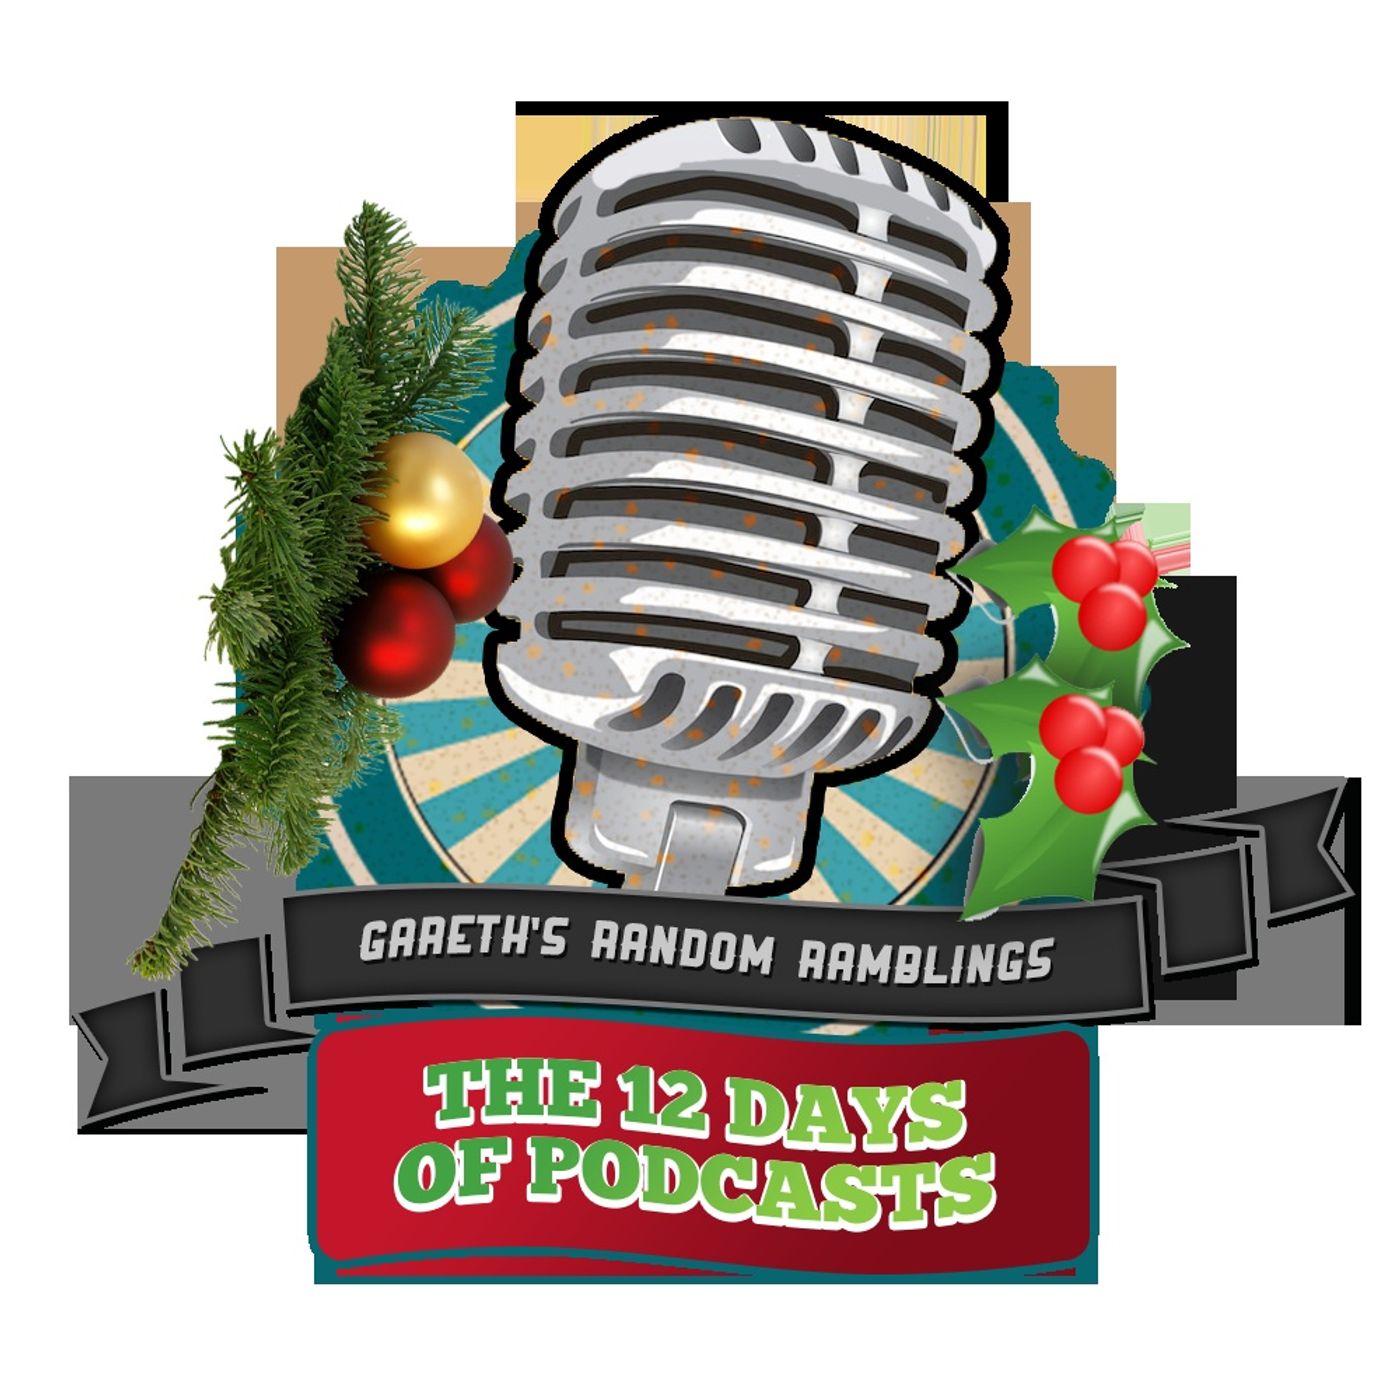 GRRPOD - 12 Days Of Christmas - Day 1 - Looking forward to most this Christmas